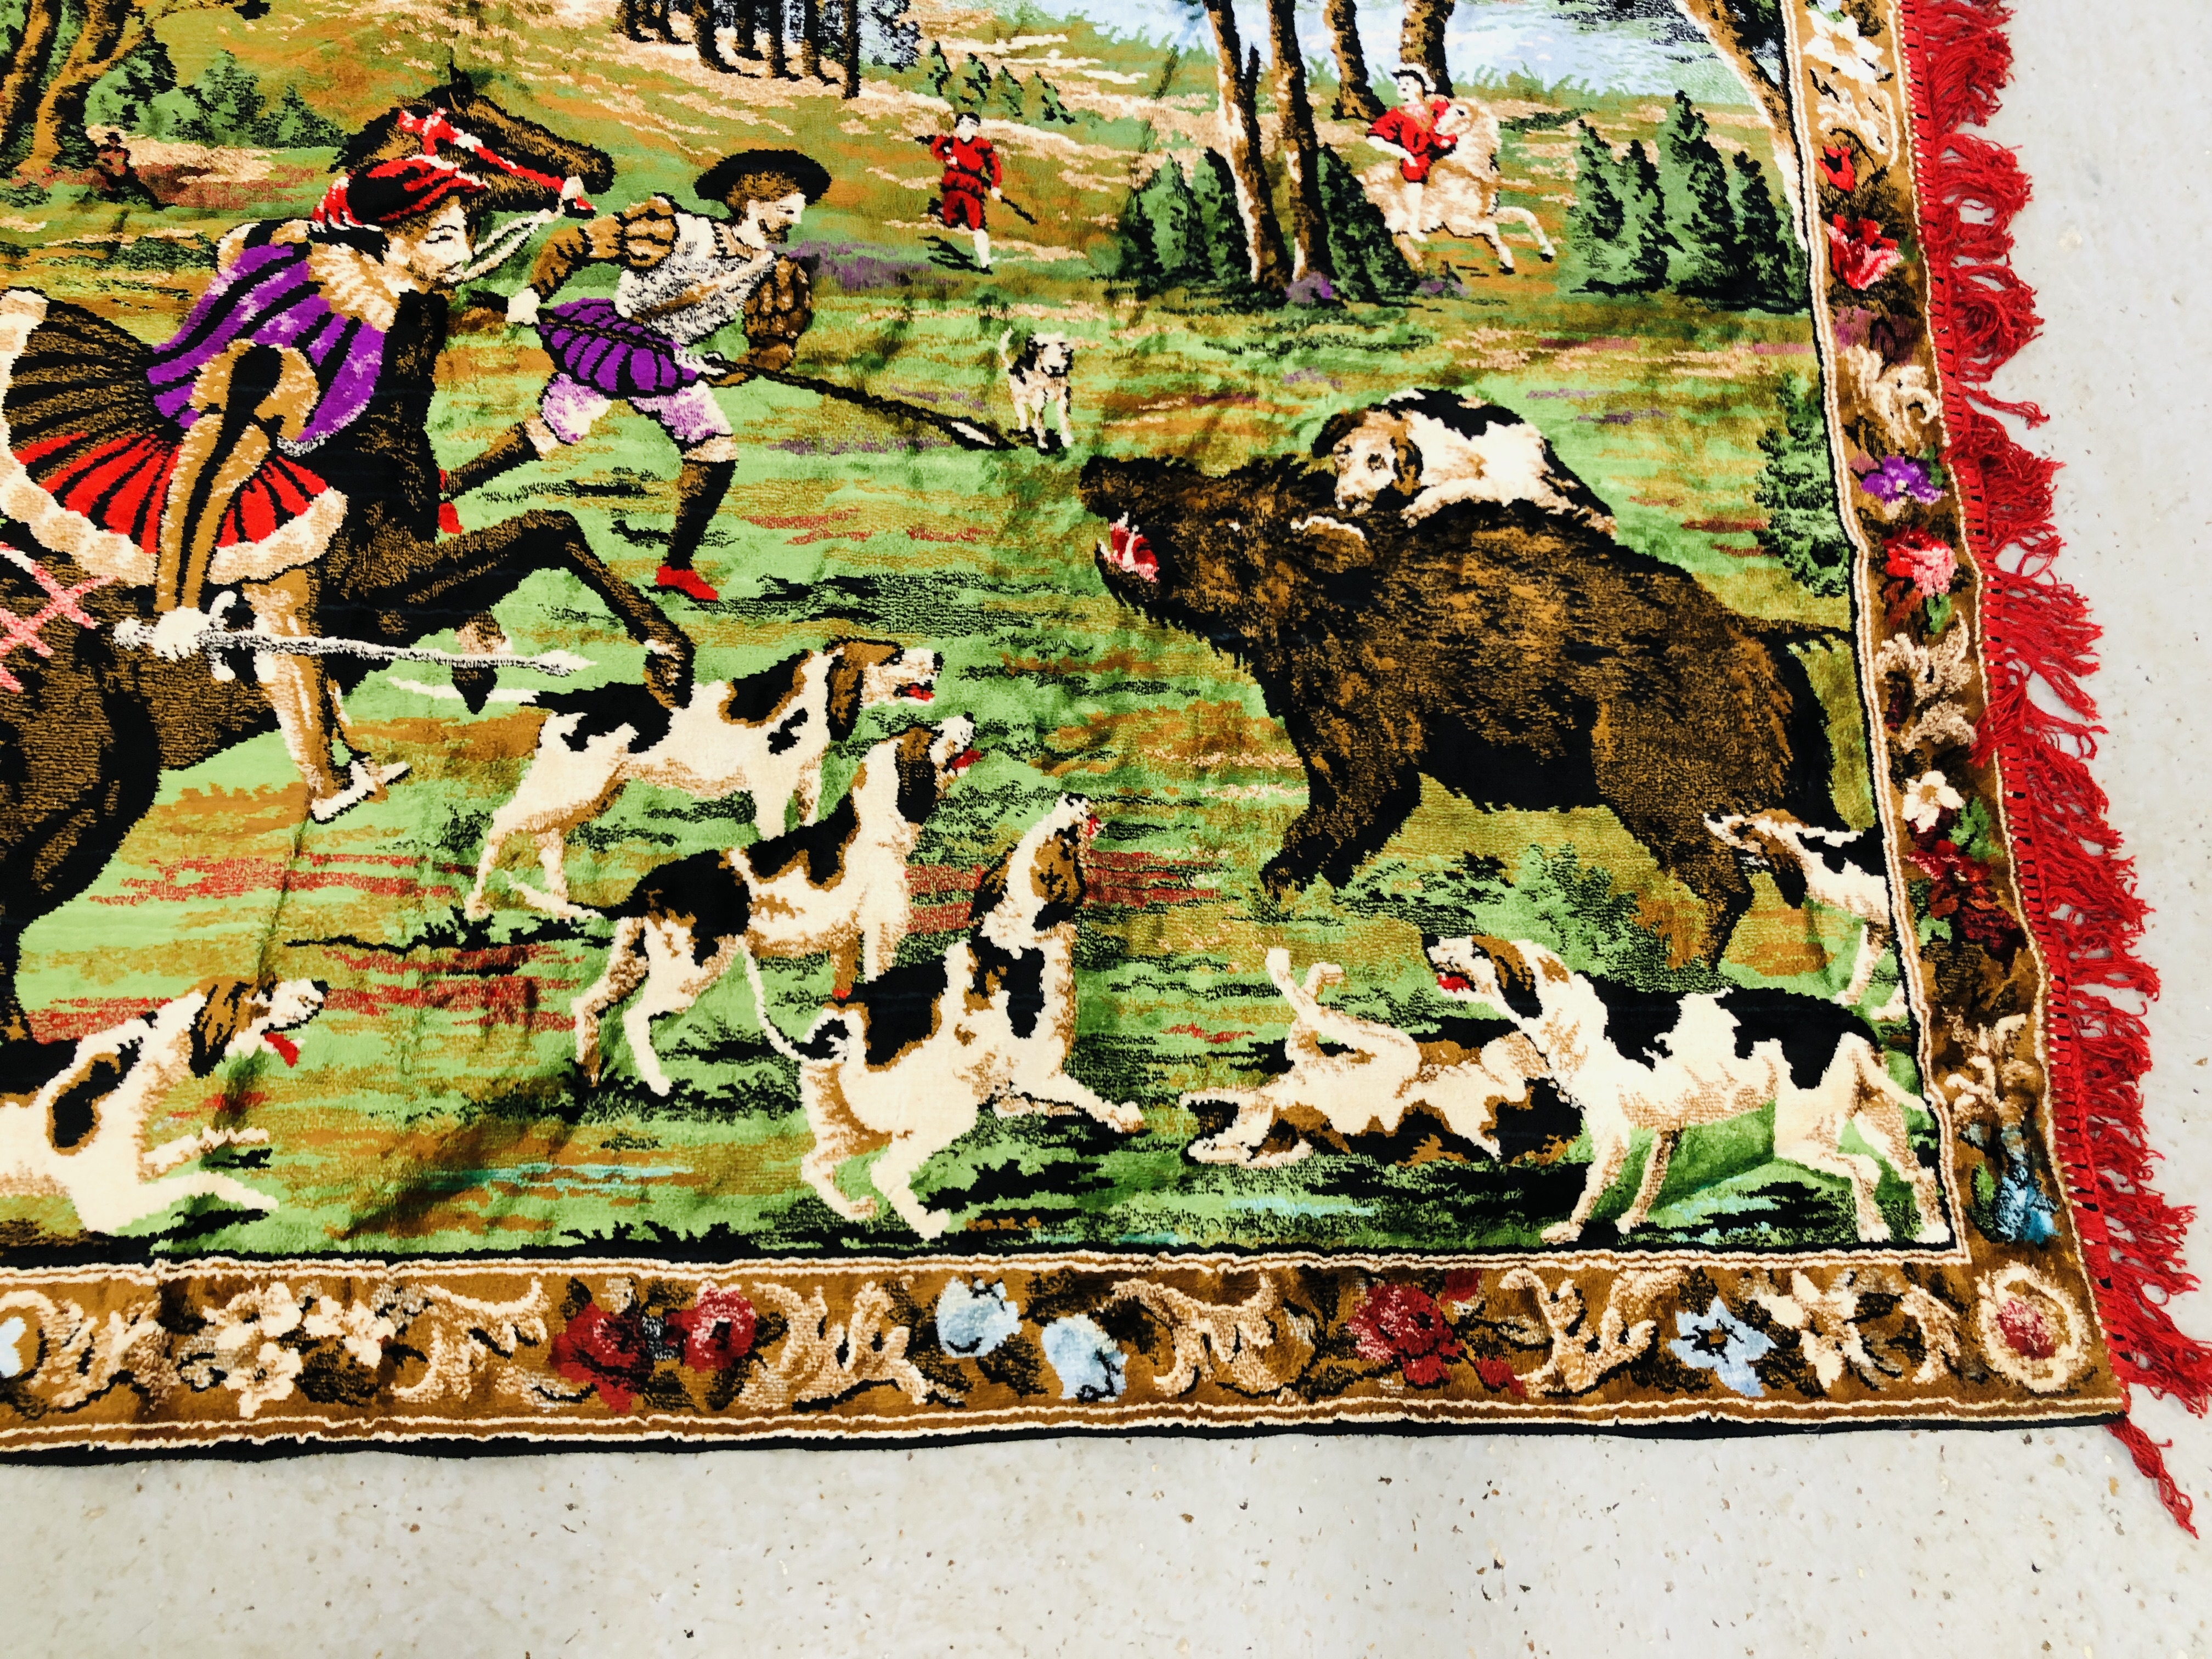 LARGE WALL HANGING DEPICTING A HUNTING SCENE WIDTH 174CM. HEIGHT 117CM. - Image 5 of 6